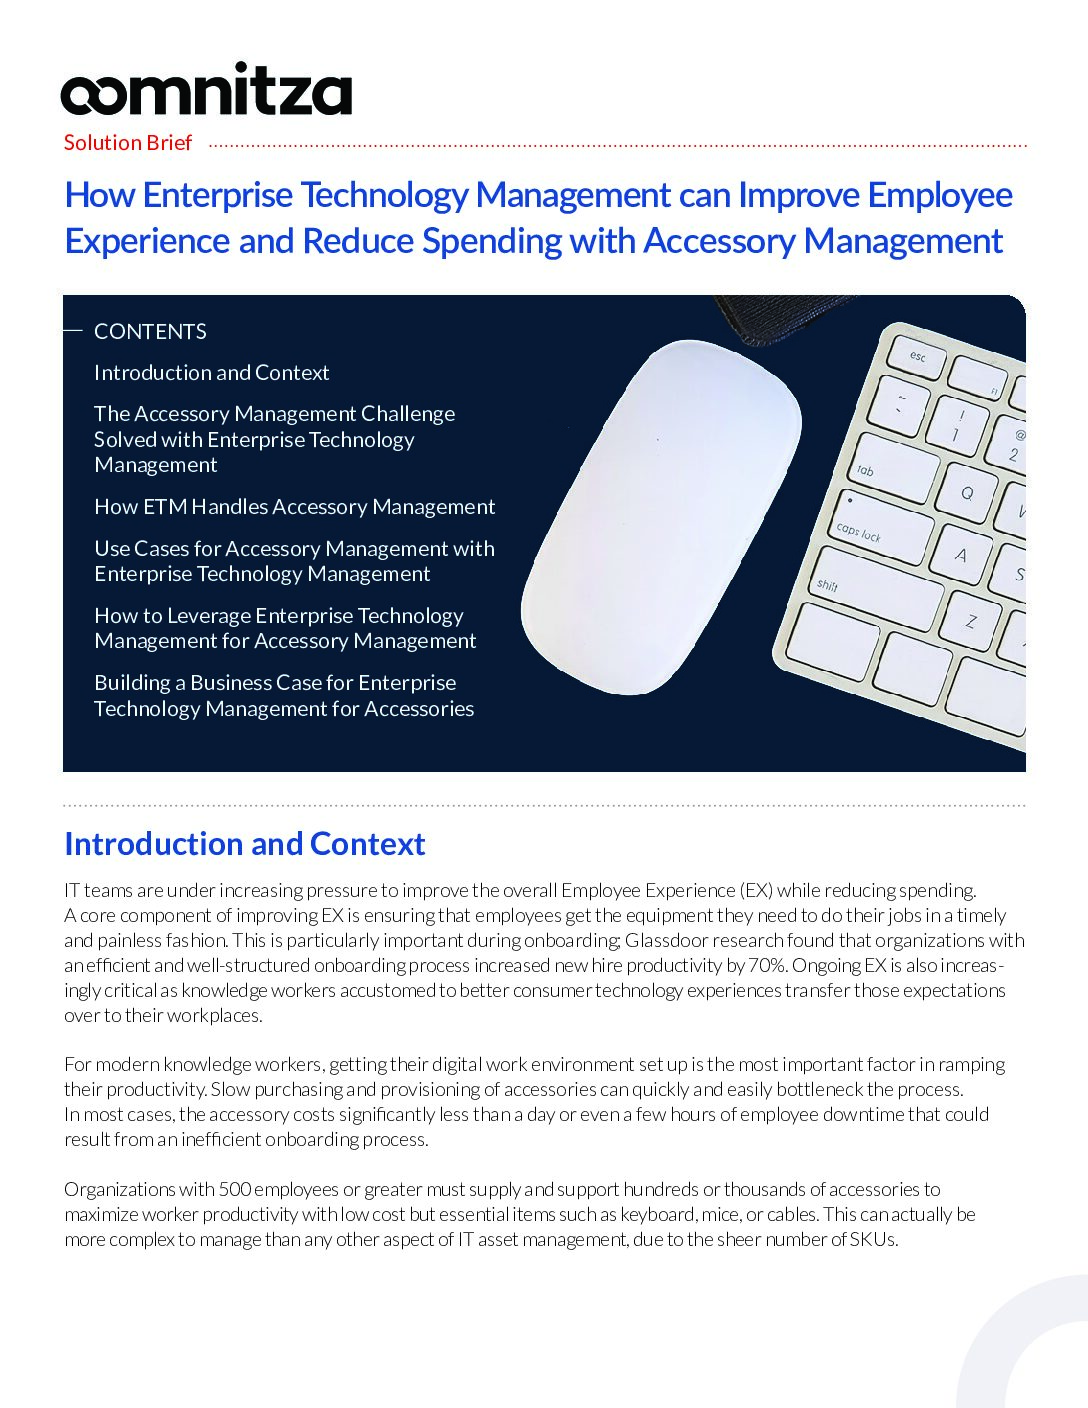 Featured image for How Enterprise Technology Management can Improve Employee Experience and Reduce Spending with Accessory Management